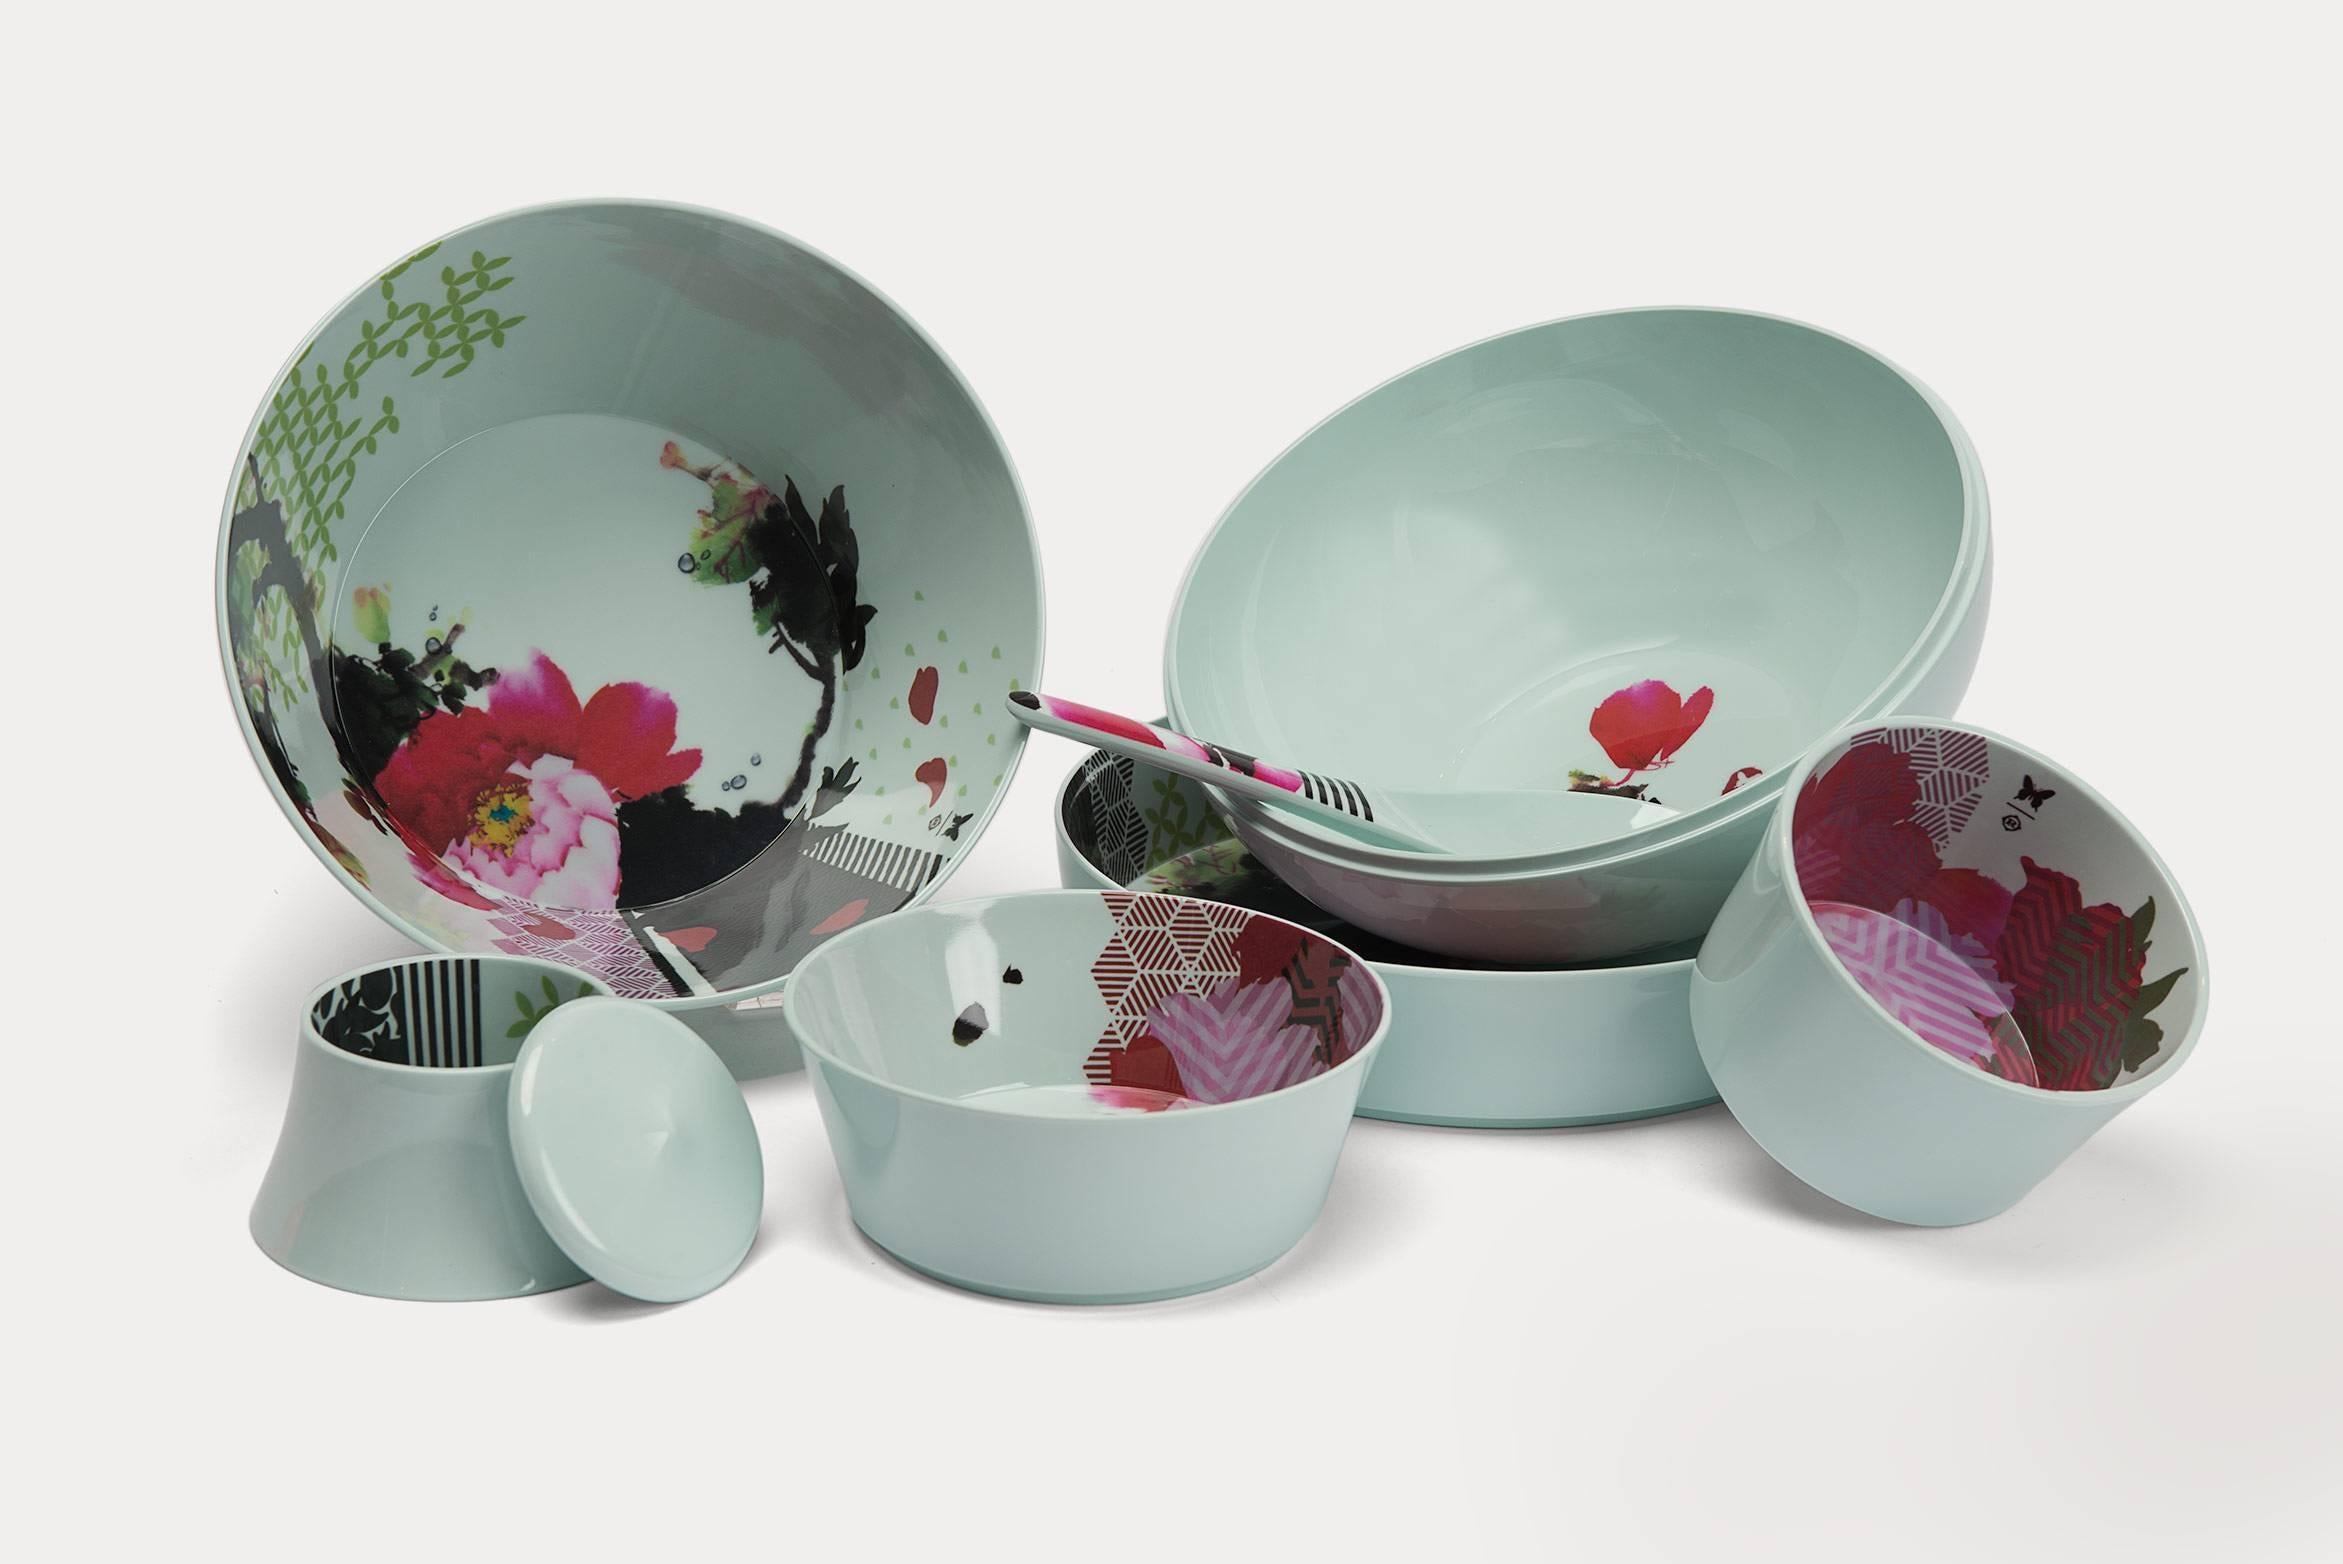 Ming Faux Semblant, by Ibride, is a stackable melamine bowl set which adds a unique design to the home. Function meets beauty with this set of six bowls in various sizes, a spoon and a simple lid to finish the piece. Made of melamine, dishwasher